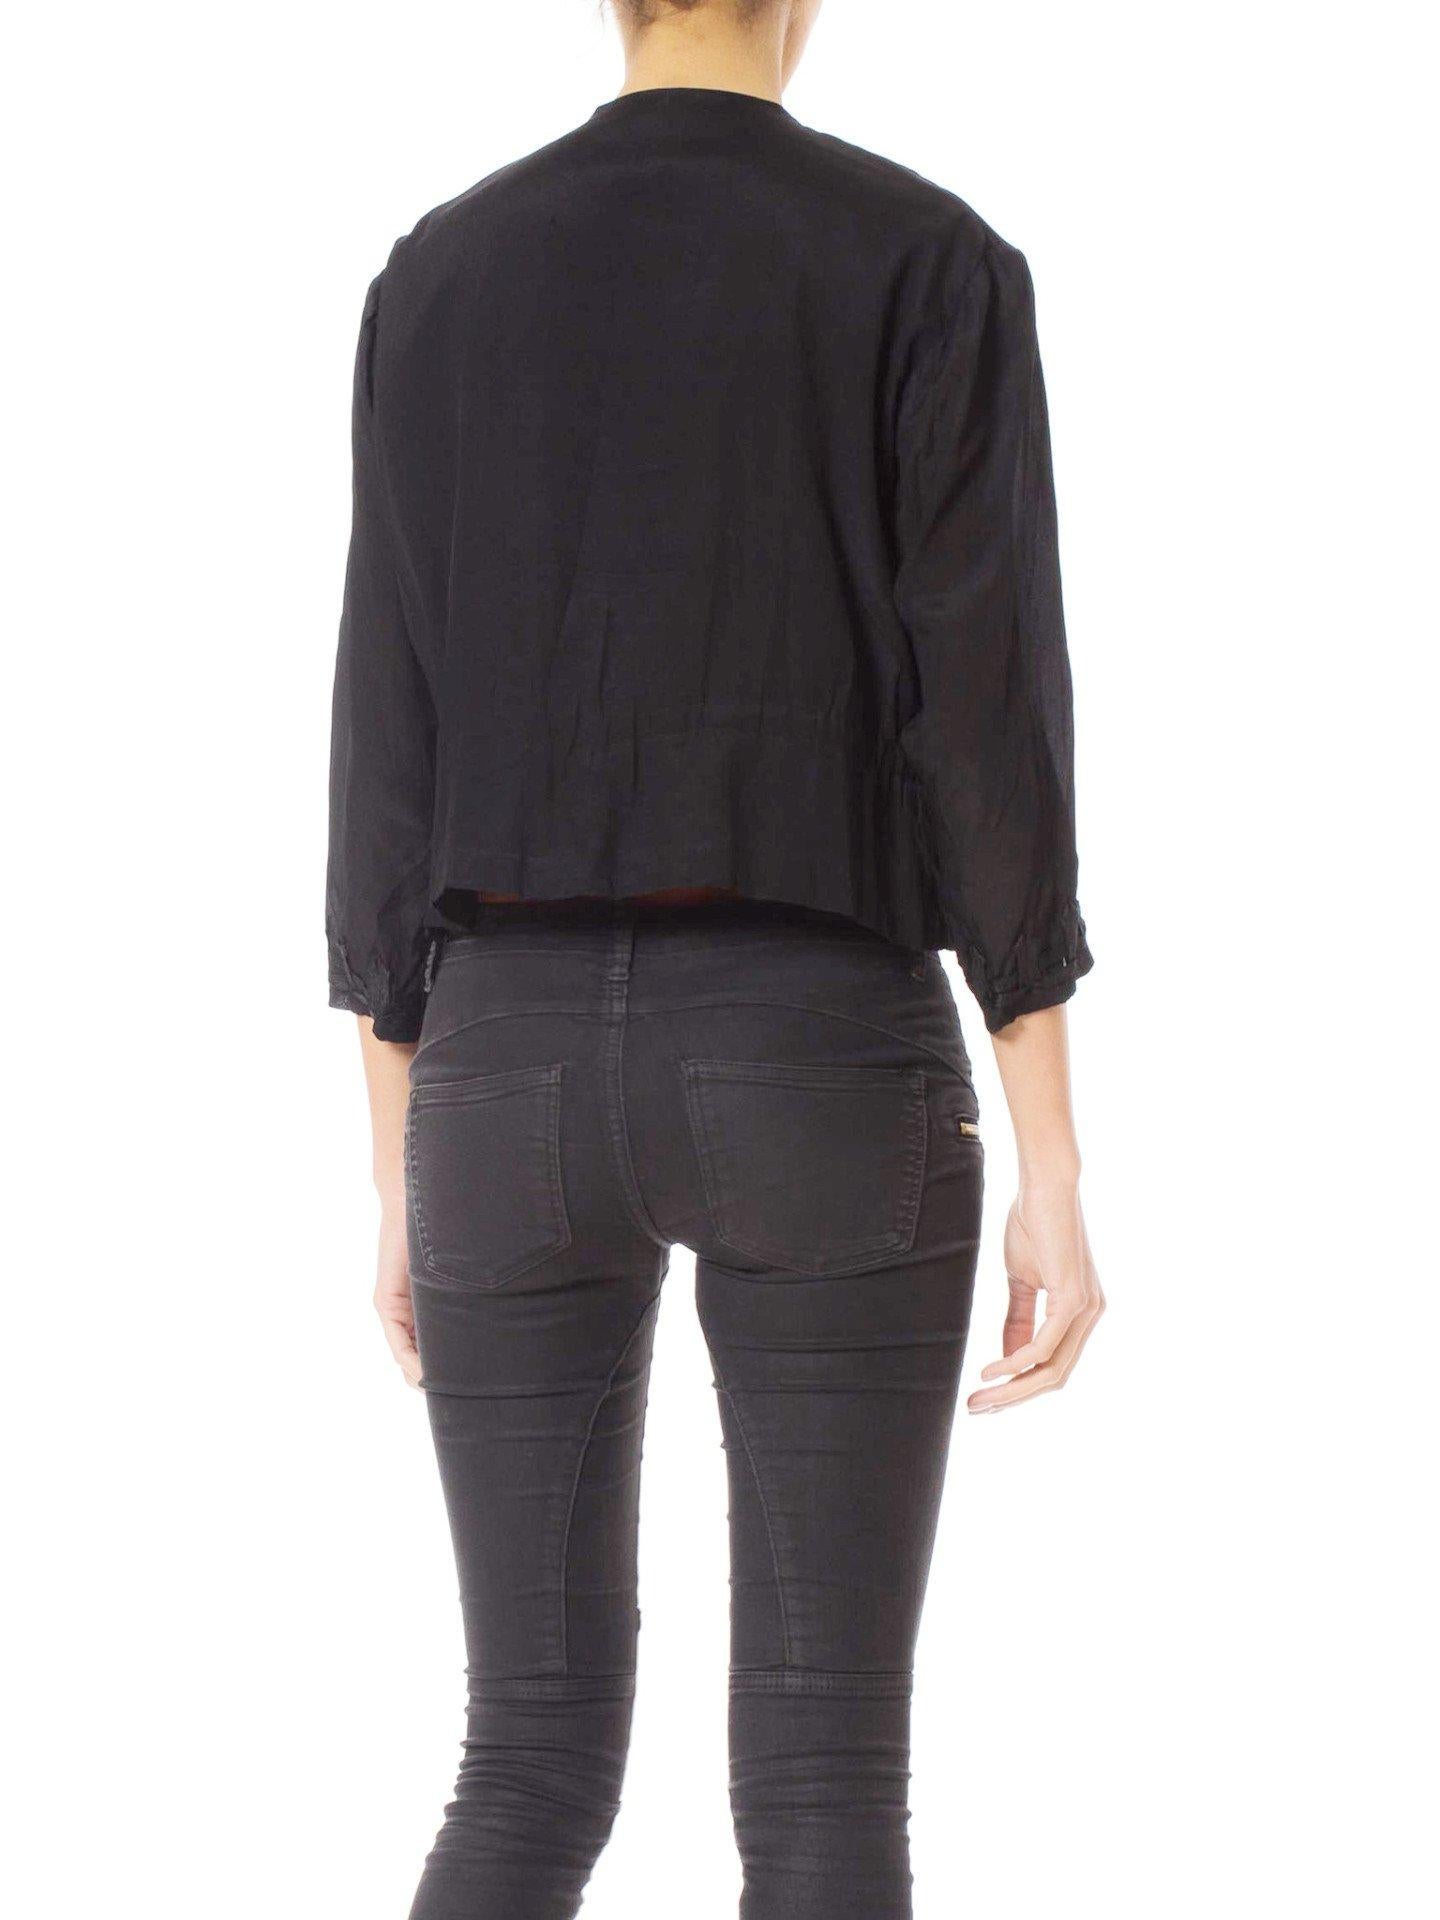 Women's Edwardian Black Silk Crepe De Chine Blouse With Military Passementerie & Lined  For Sale